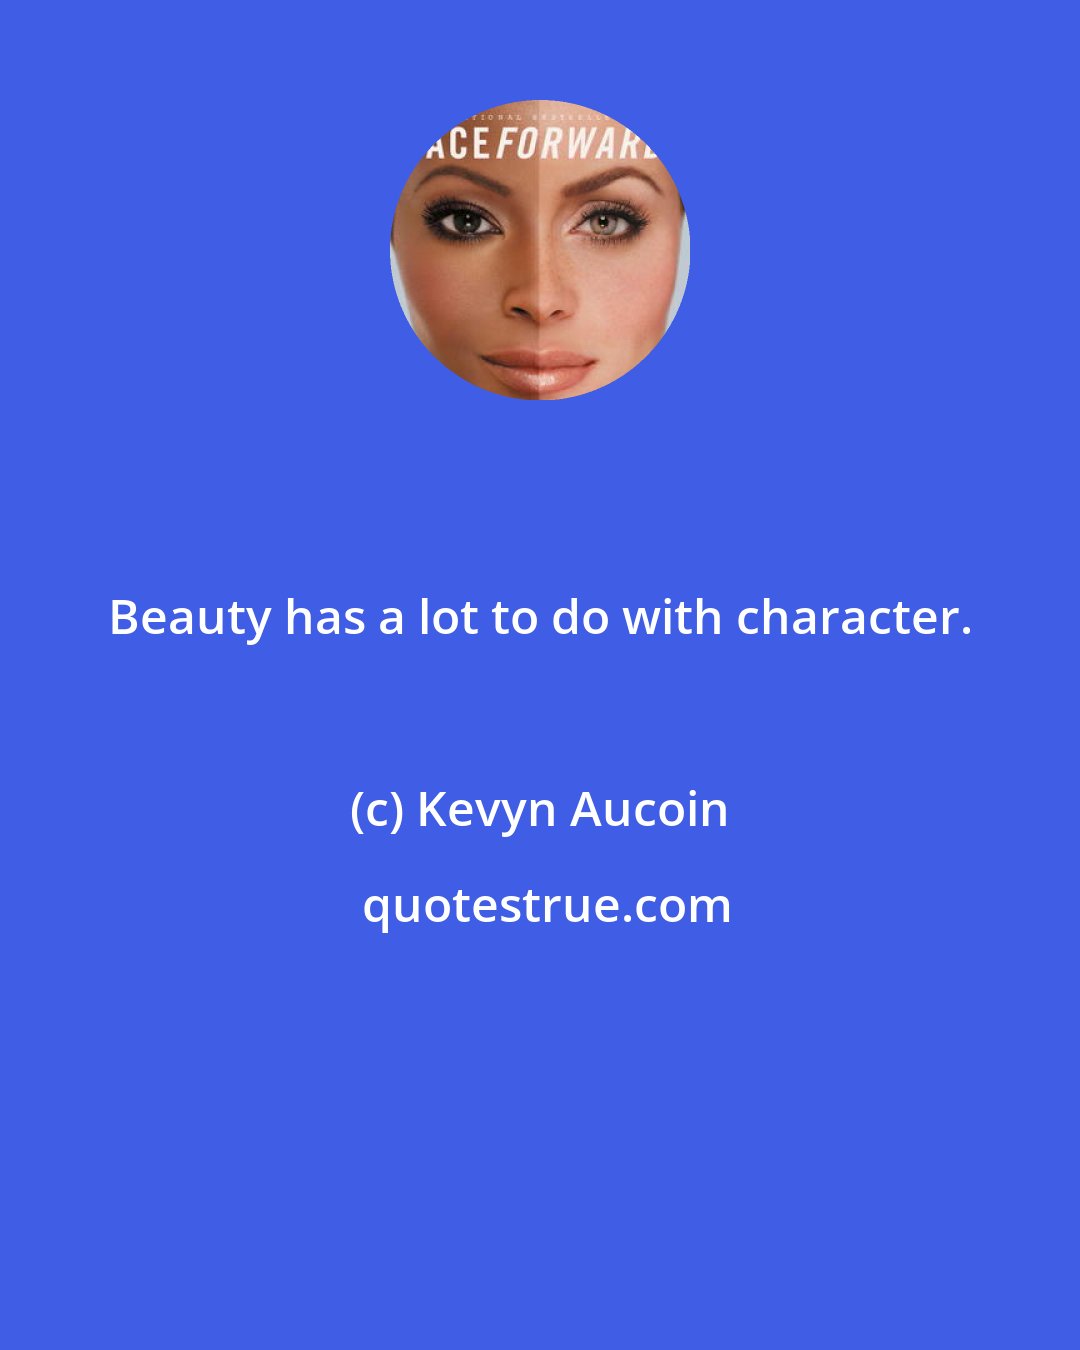 Kevyn Aucoin: Beauty has a lot to do with character.